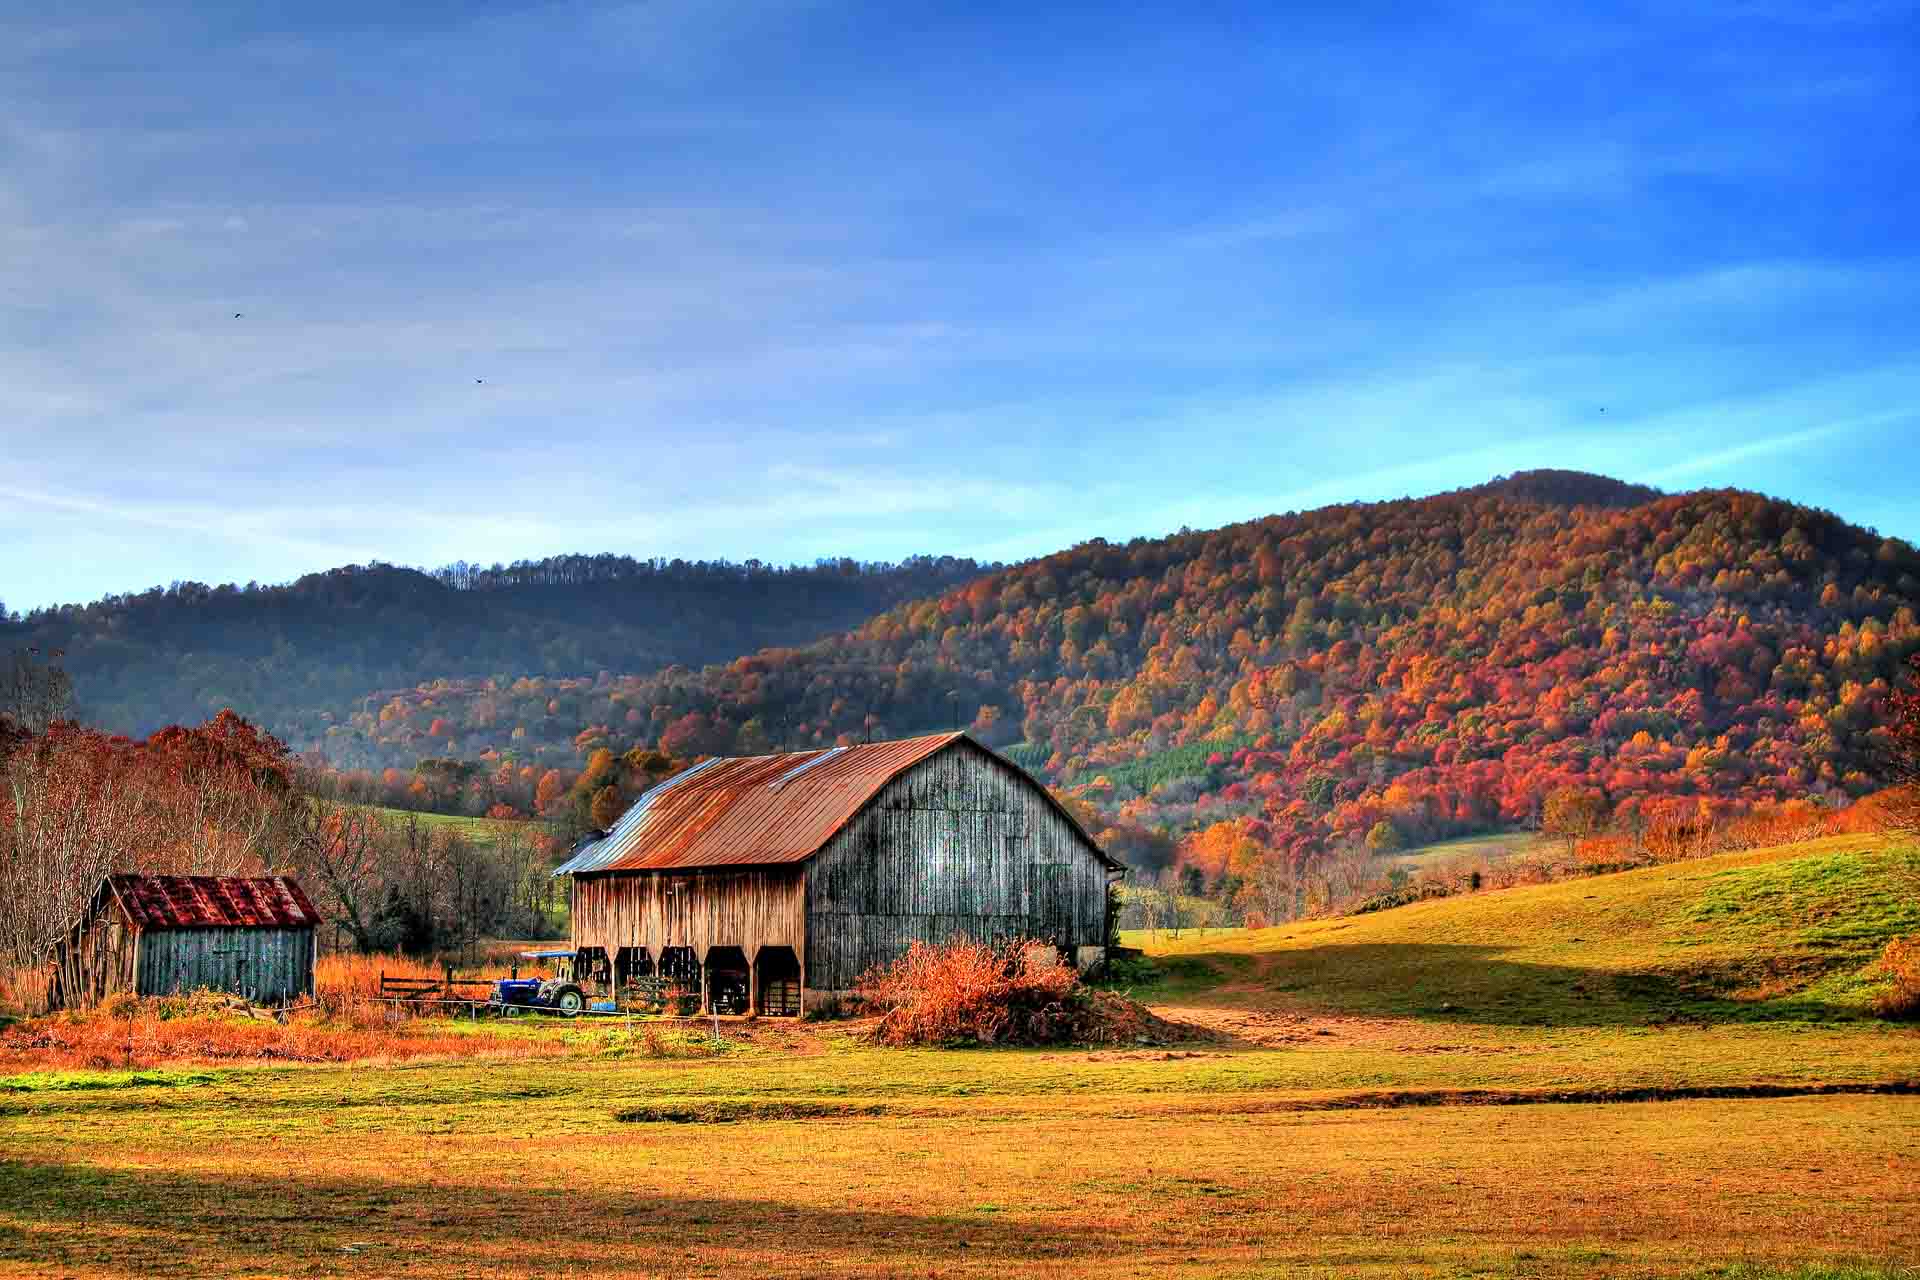 A old barn with rustry metal roof in a valley with brightly colored fall trees surrounding on the hillside.